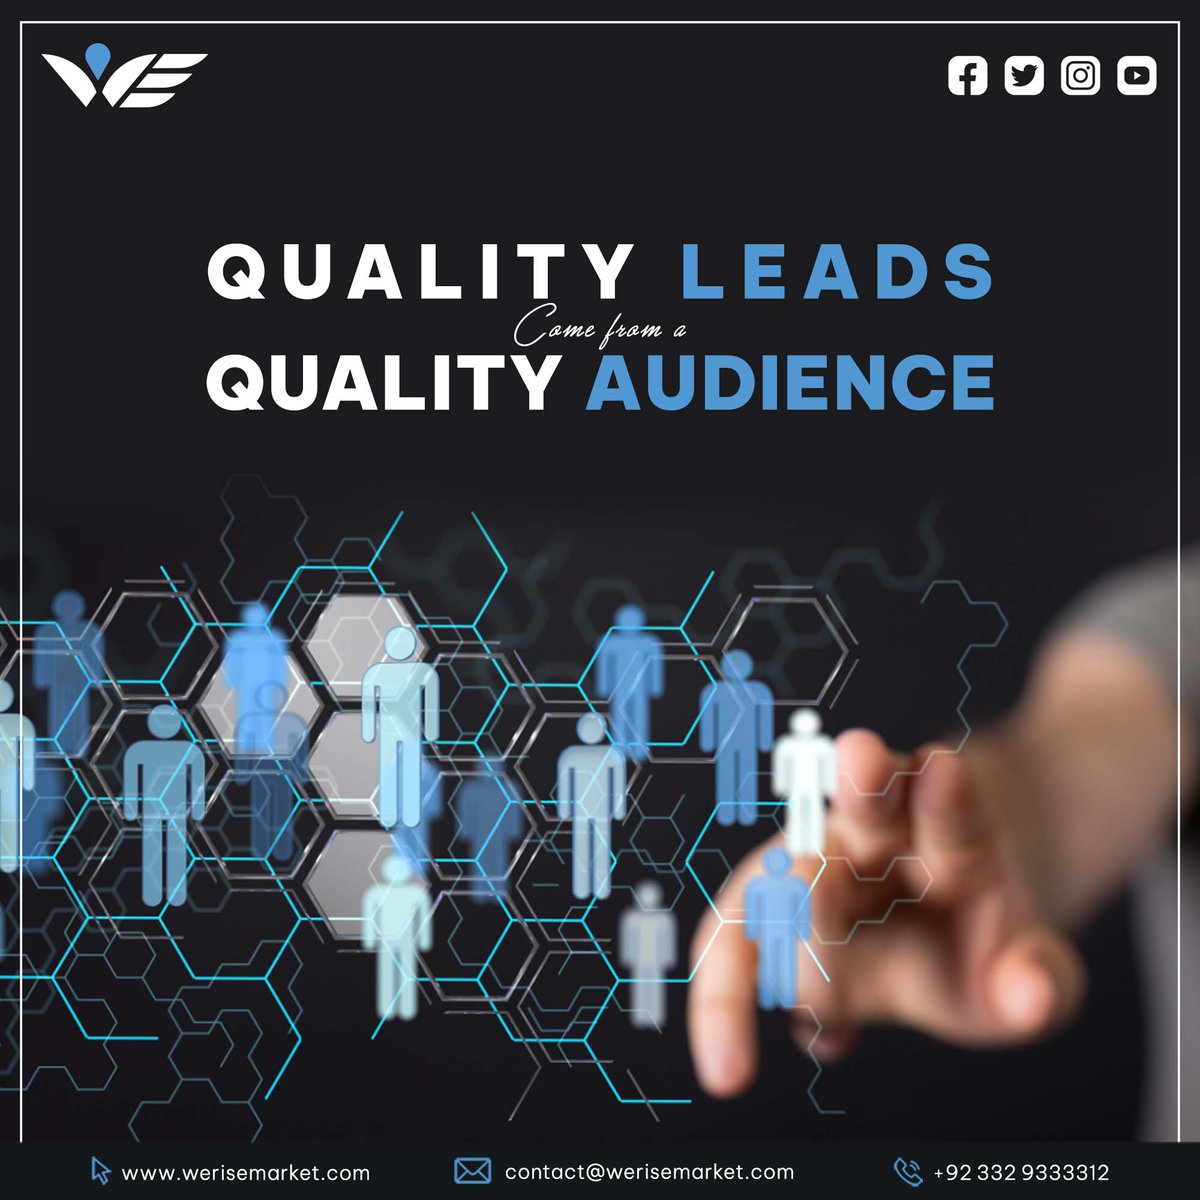 Quality Leads Come from Quality Audience And quality Audience comes from a quality marketing plan... Isn't it???? Come to us, we will make you stand out in the market 📱 +92 332 933 3312 #werisemarket #digitalmarketing #branding #marketing #online #socialmedia #business